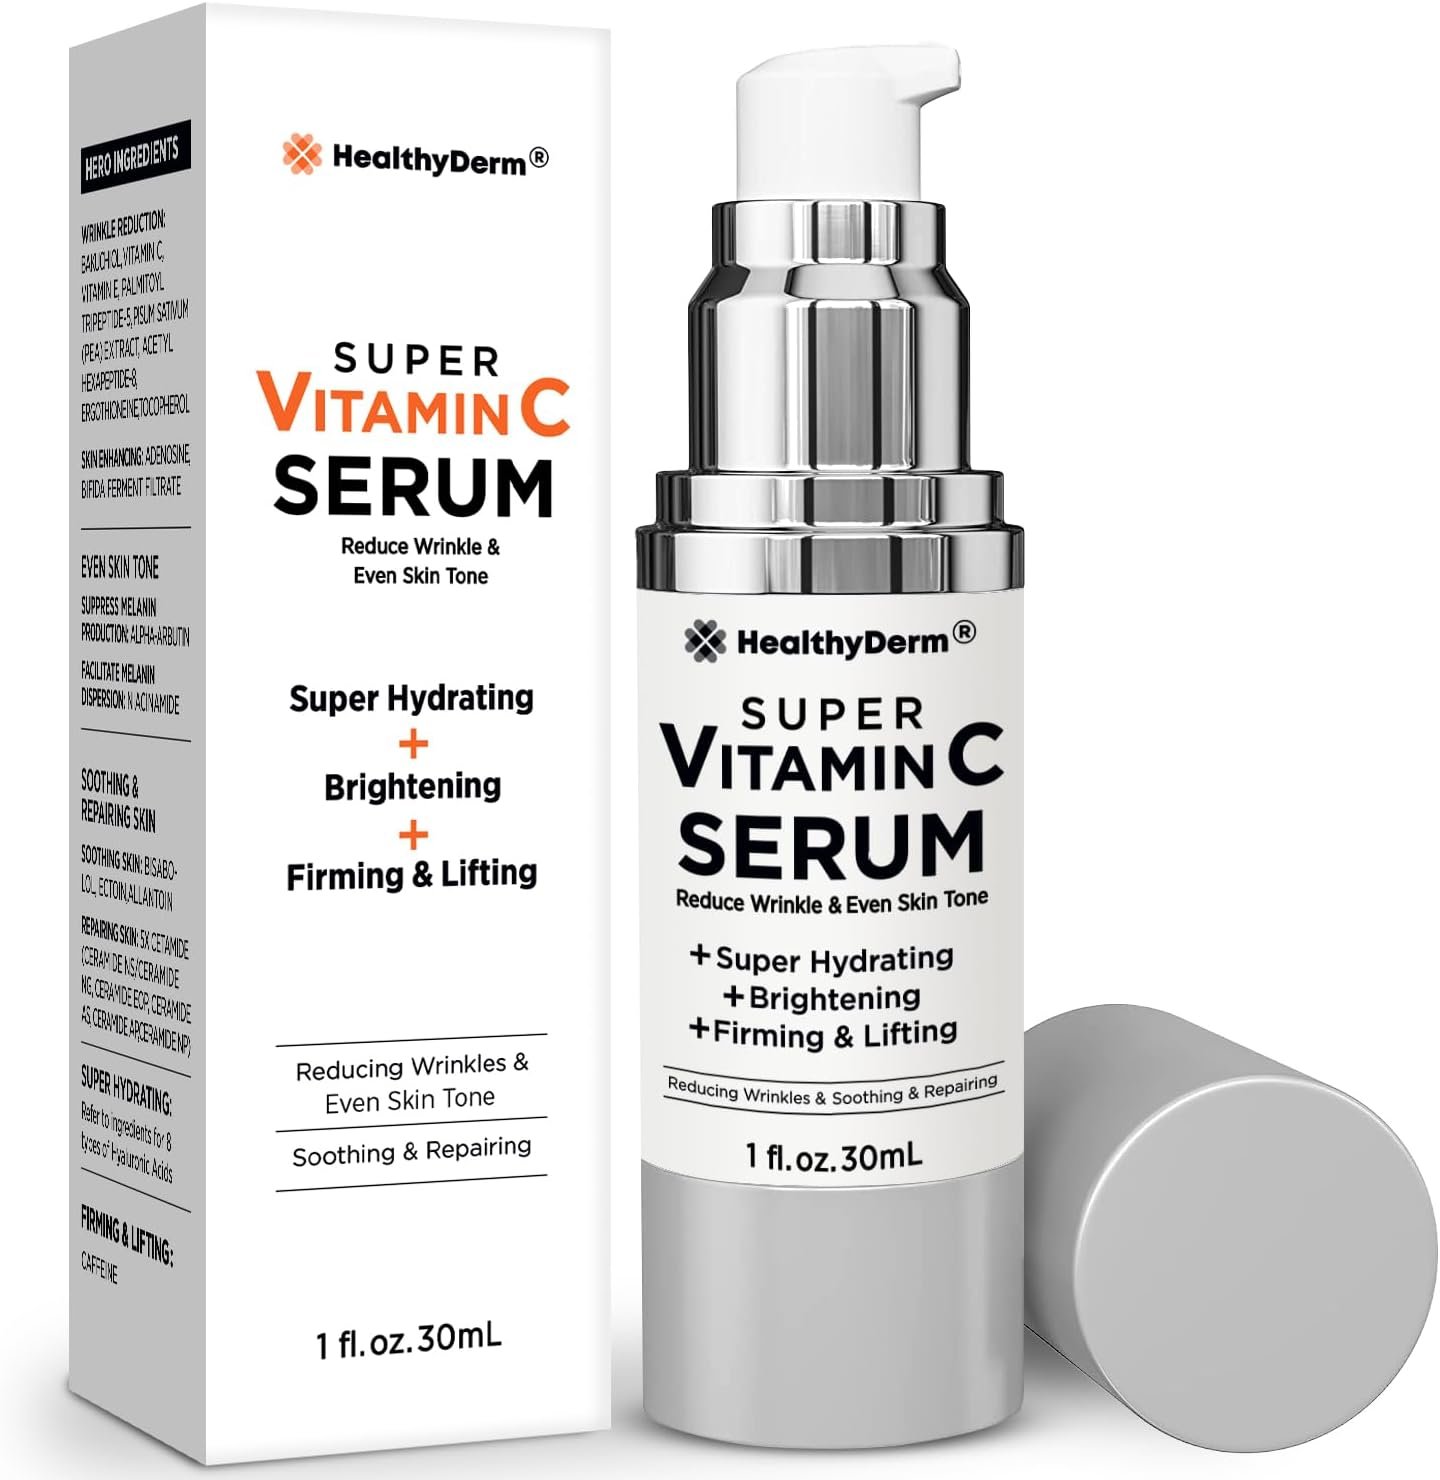 Age-Defying Super Vitamin C Serum for Women Over 50: Niacinamide, Vitamin C, Hyaluronic Acid, Peptides, Vitamin E, Caffeine, Bakuchiol, Brightening, Hydrating, Lifting, Wrinkle  Age Spots Reduction